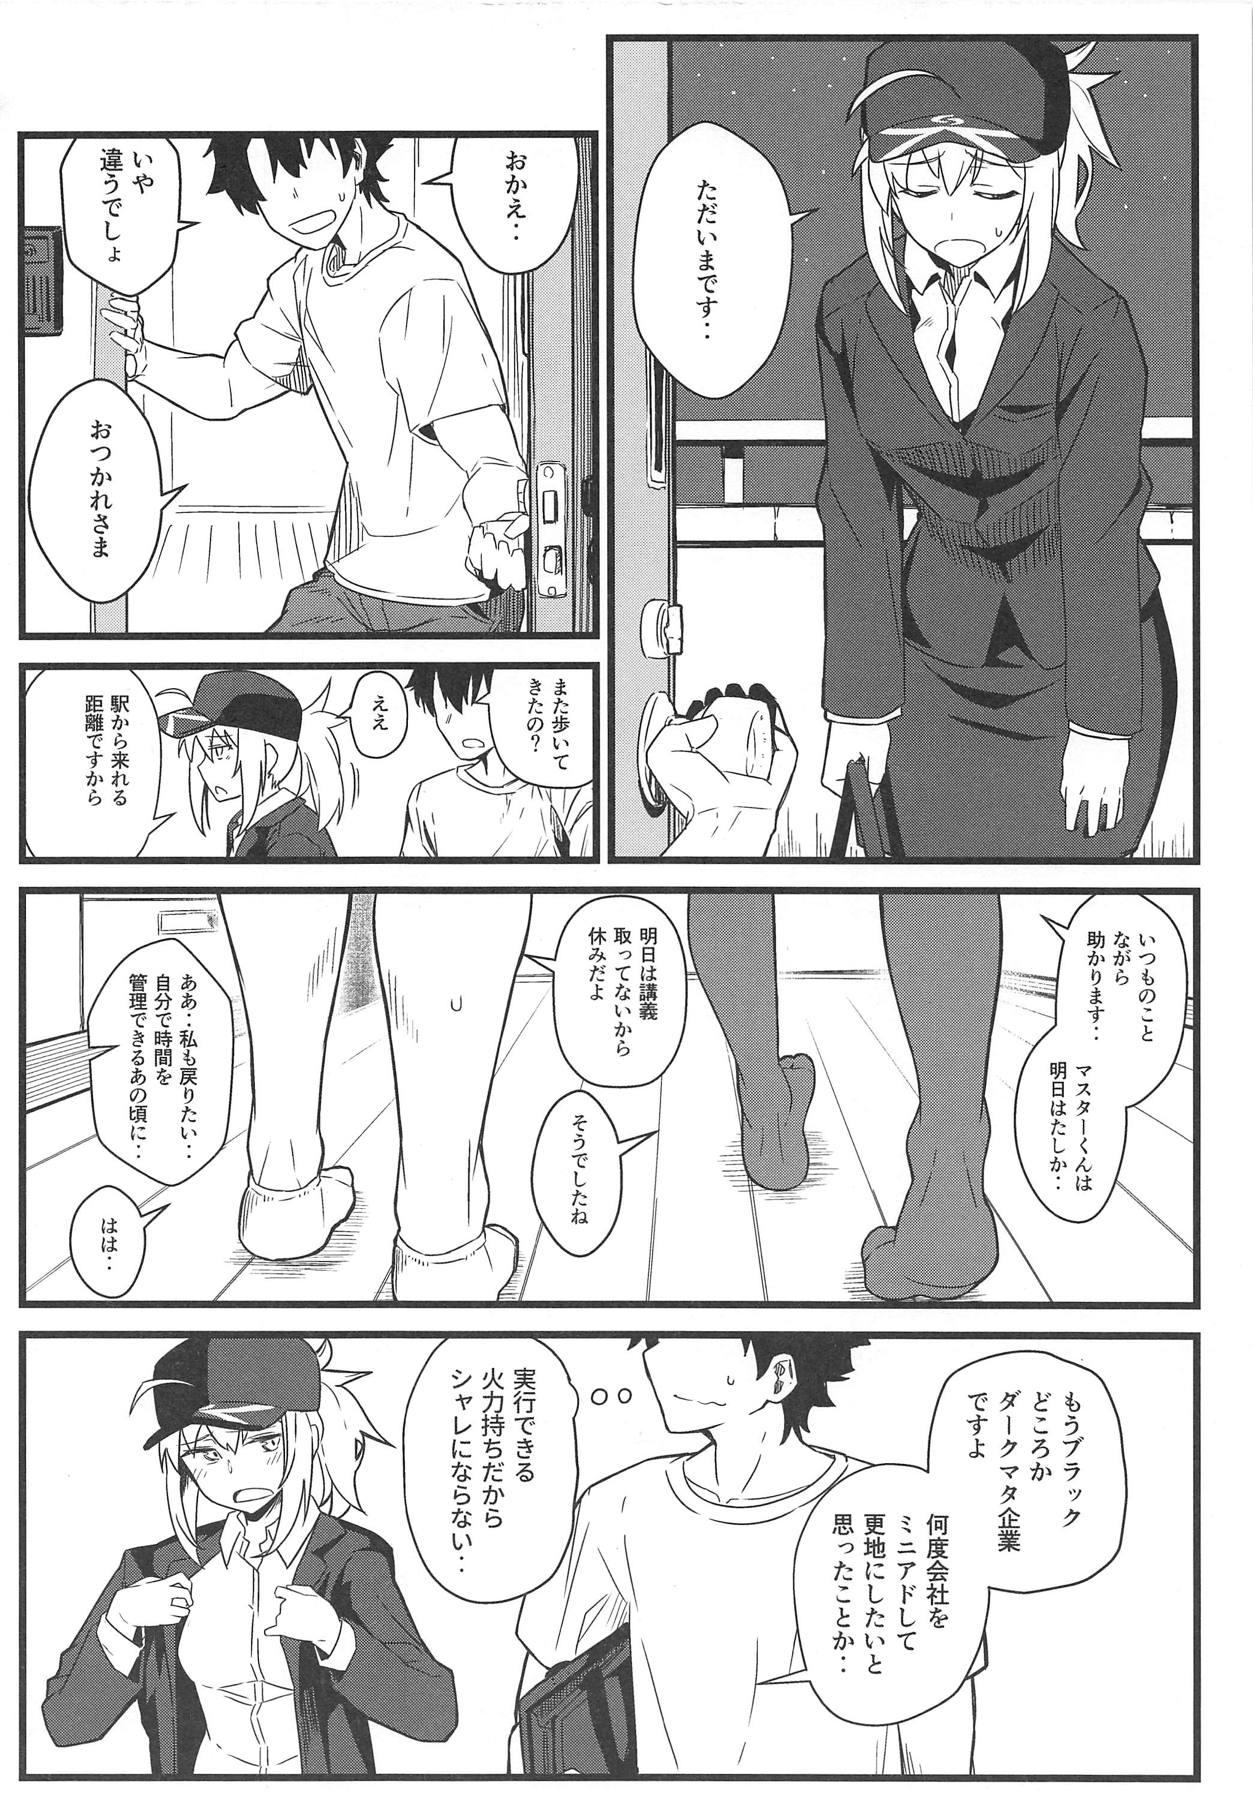 18yearsold GIRLFriend's 16 - Fate grand order Dancing - Page 3